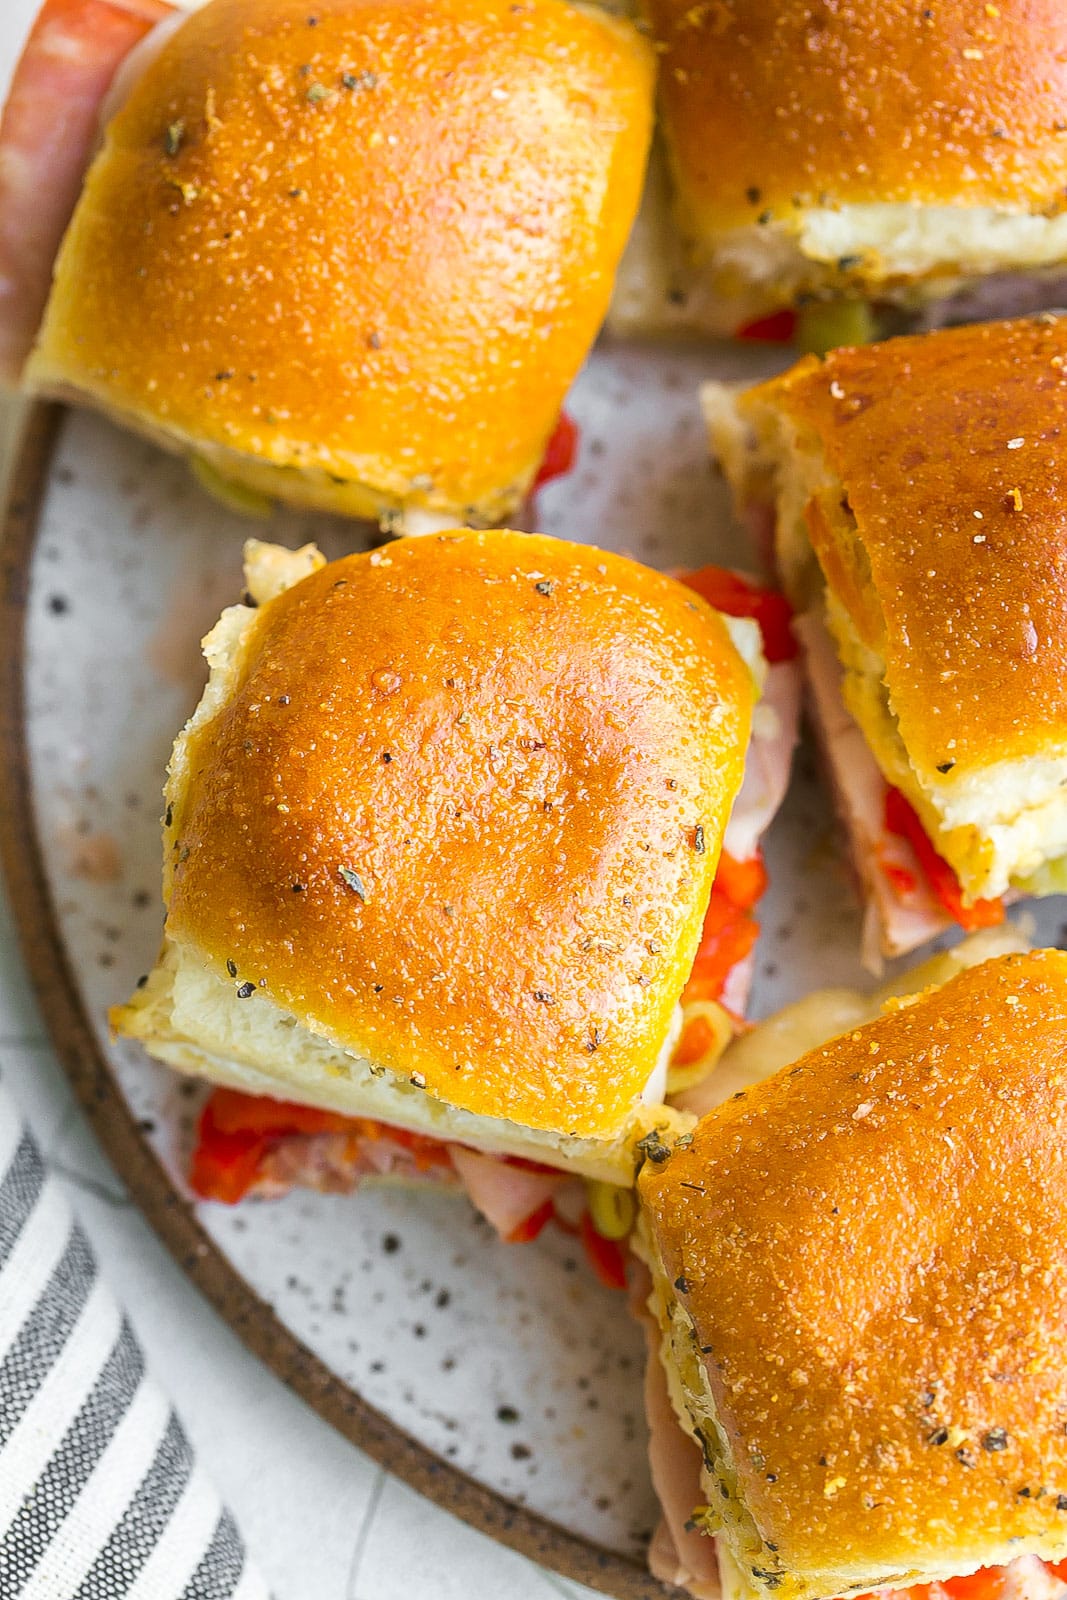 Baked sliders with Italian meats and cheeses. 